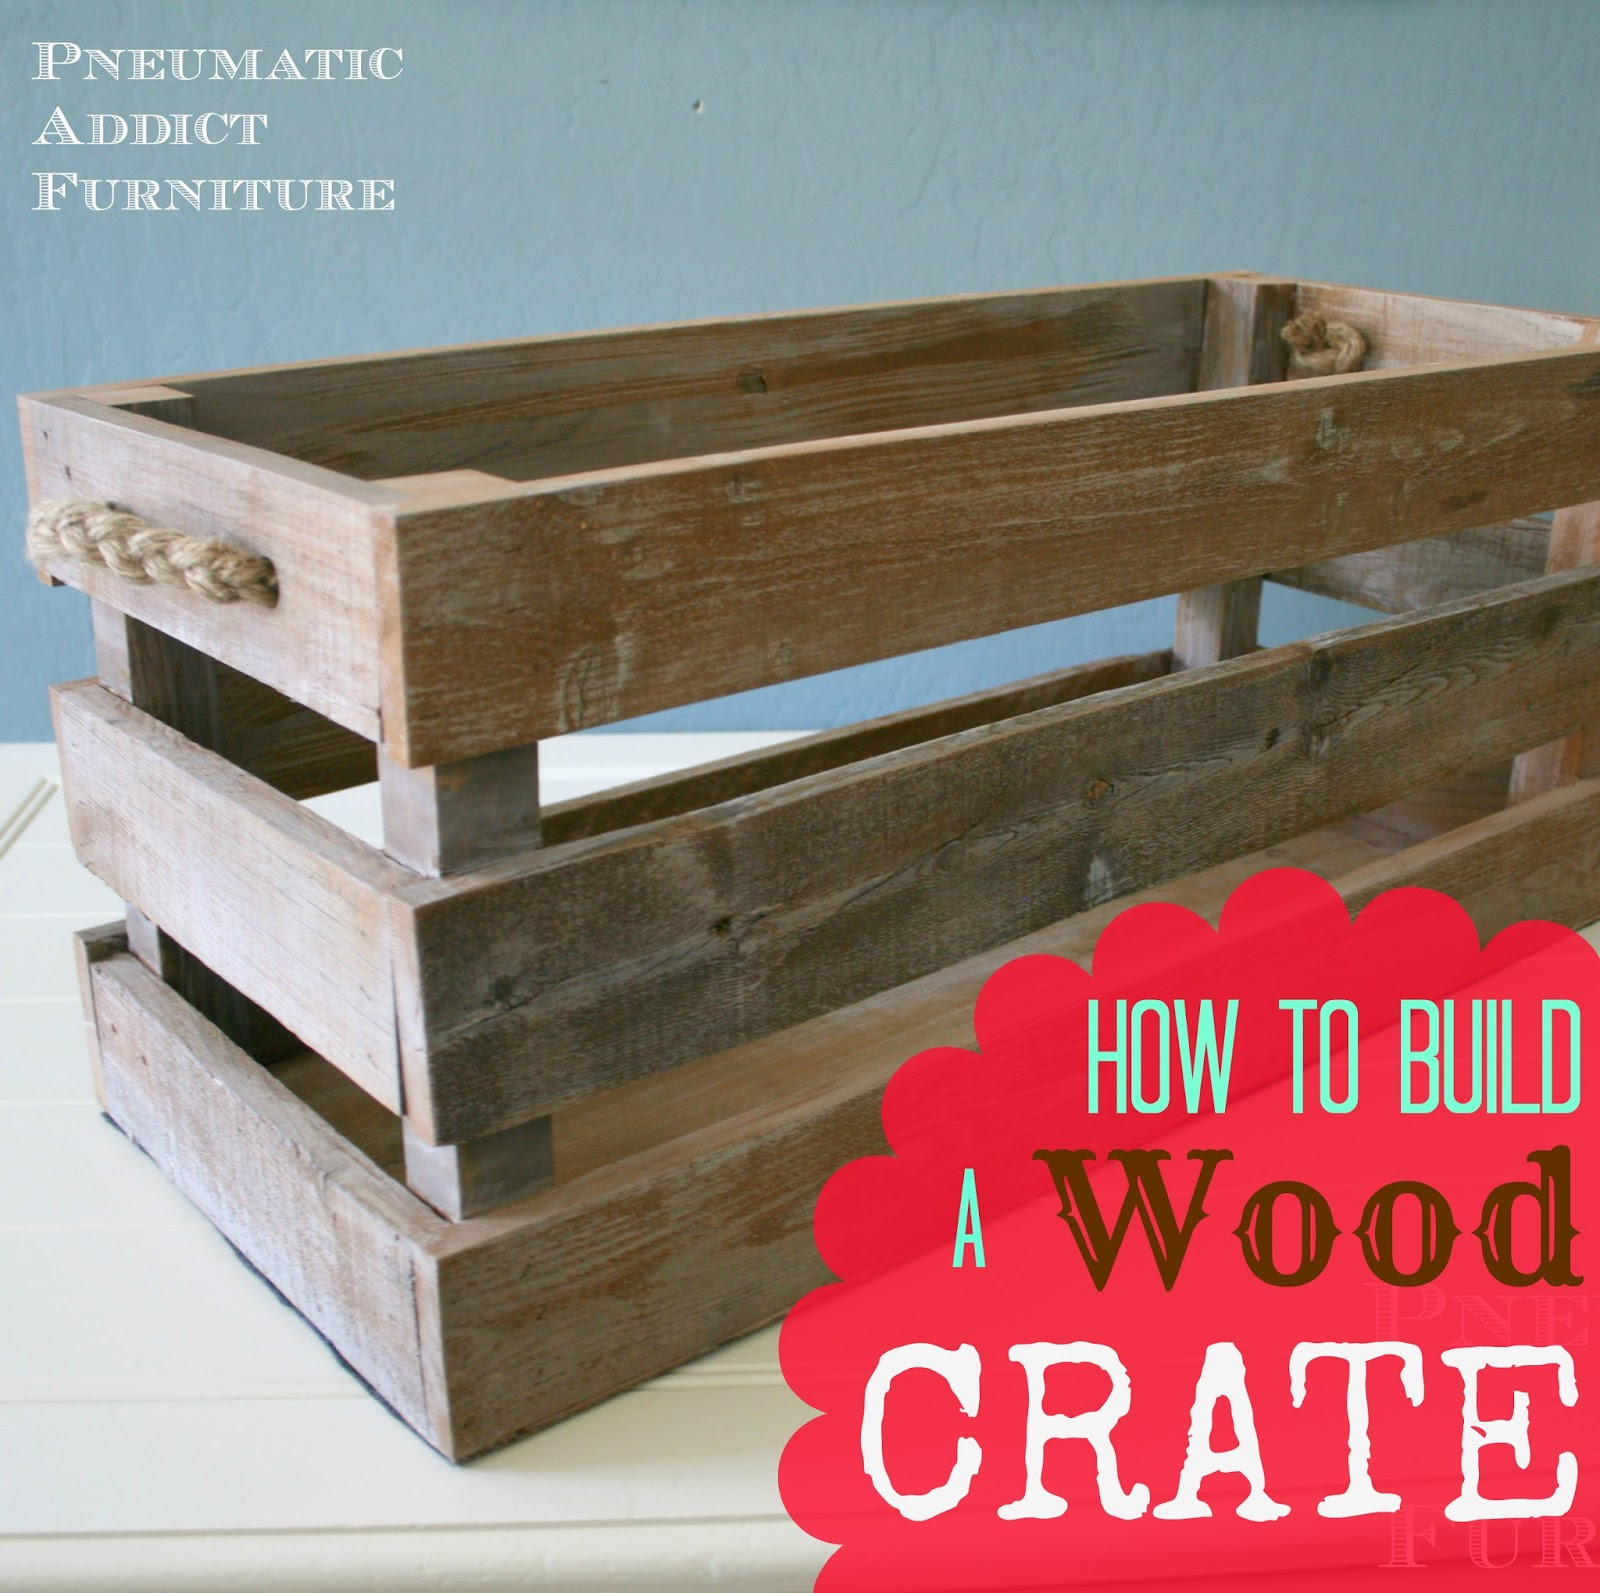 DIY Wood Crates
 How to Build a Wood Crate